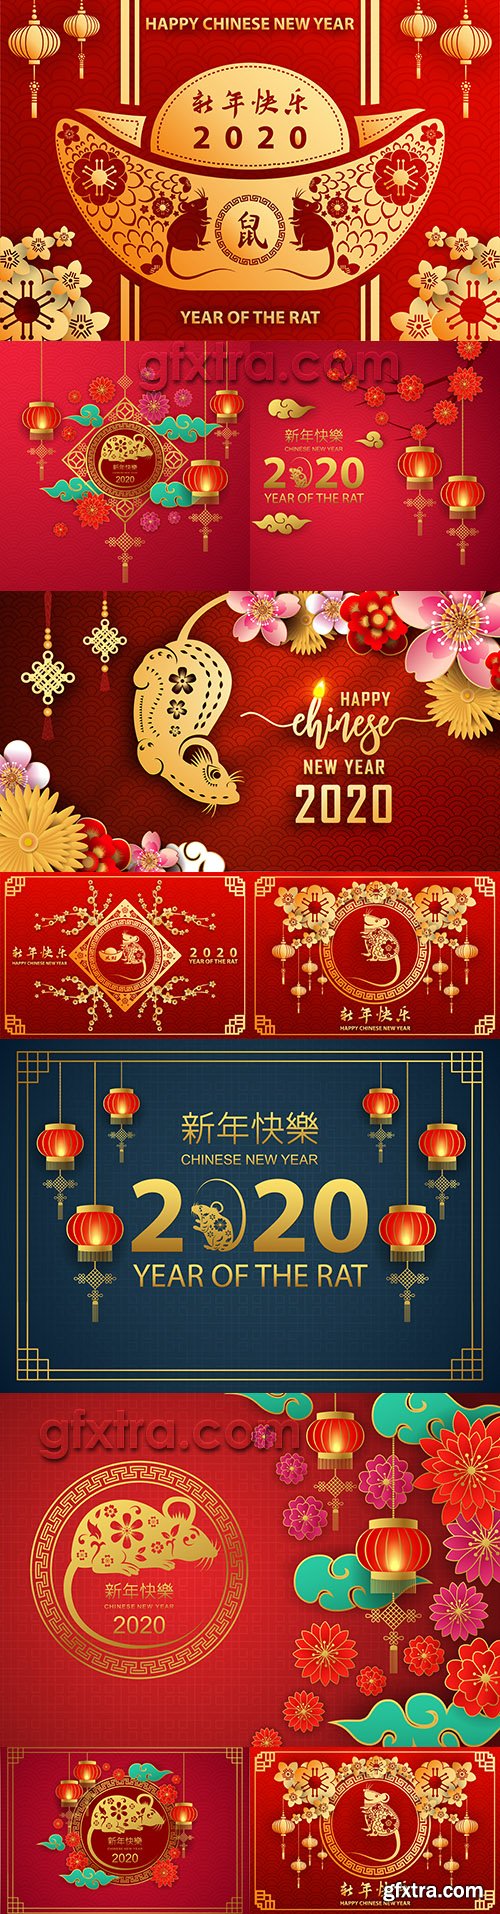 Happy Chinese New Year decorative backgrounds 11